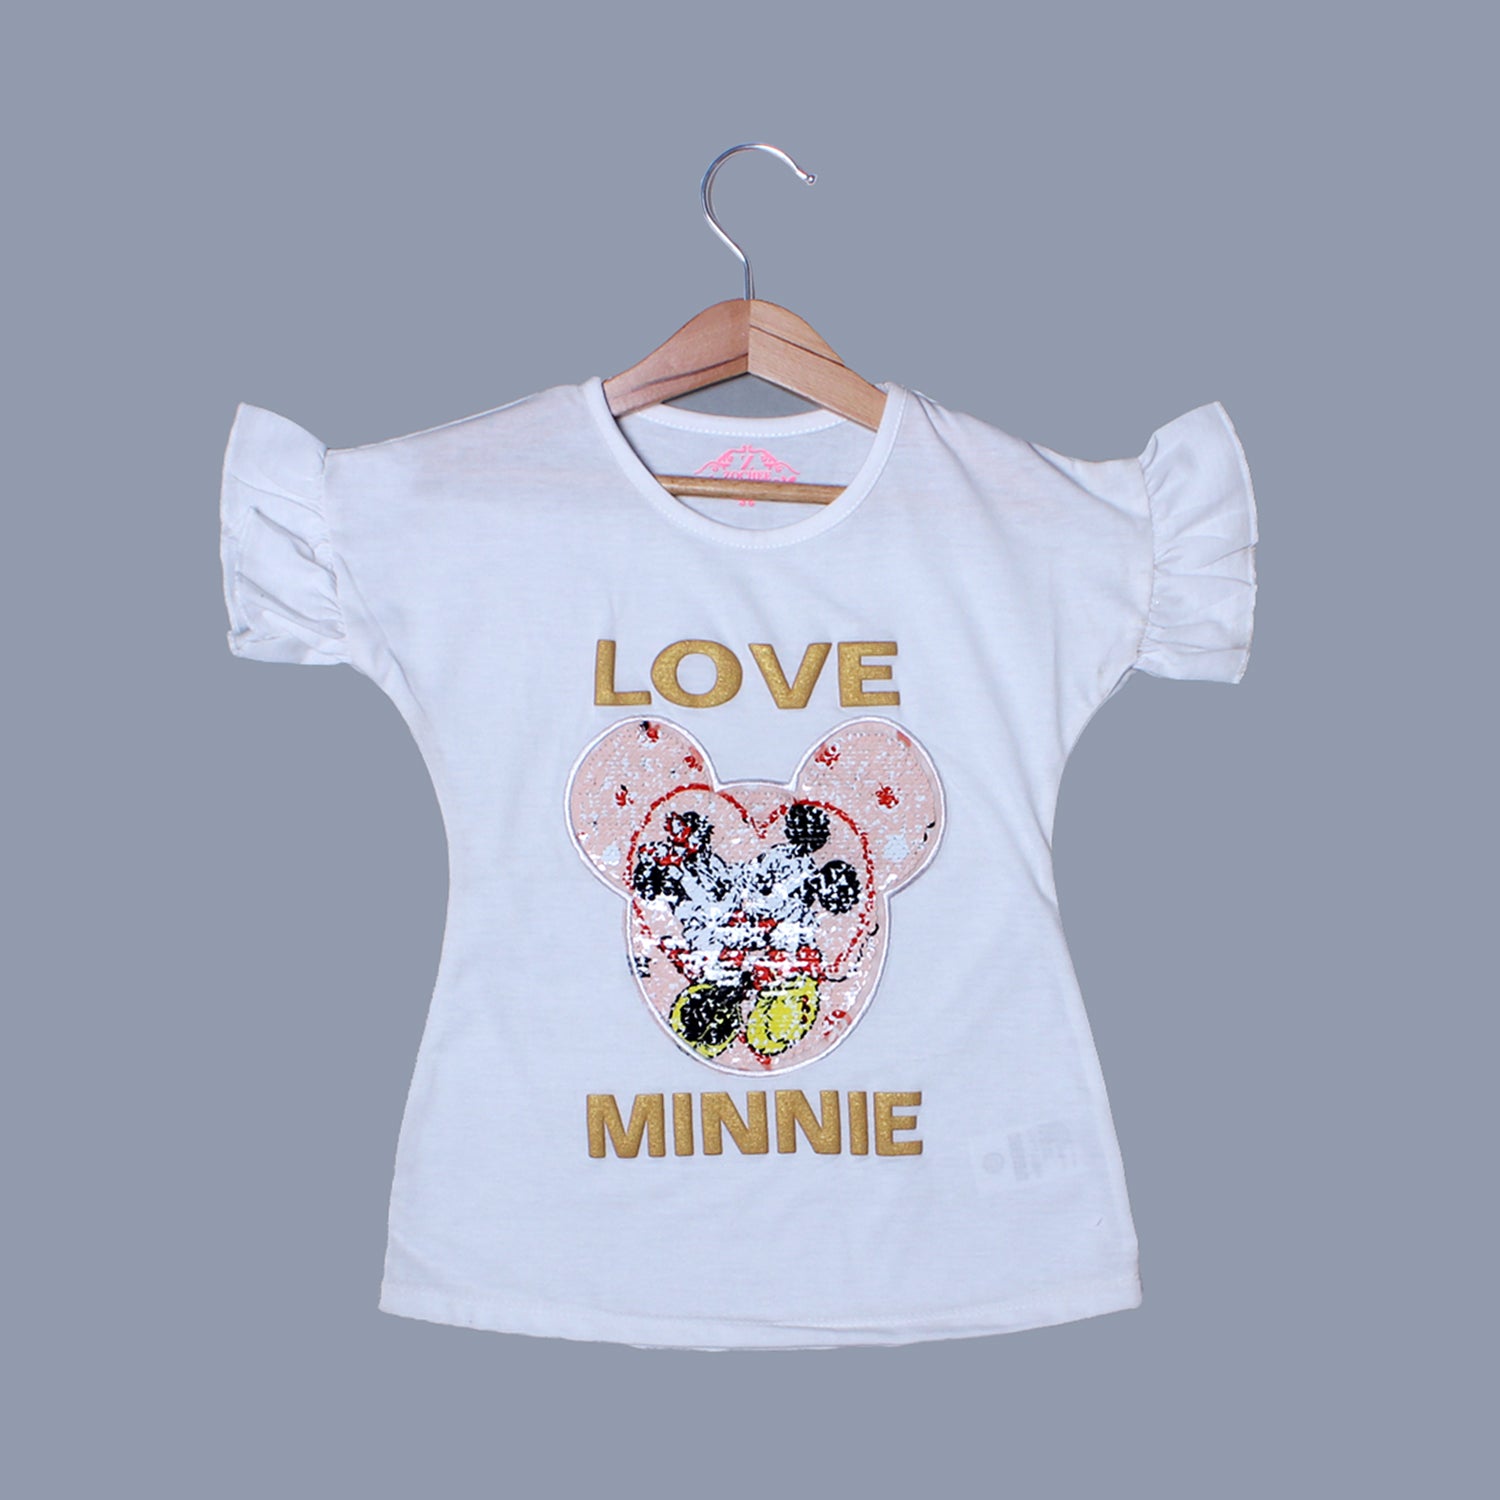 NEW WHITE LOVE MINNIE PATCH T-SHIRT TOP FOR GIRLS